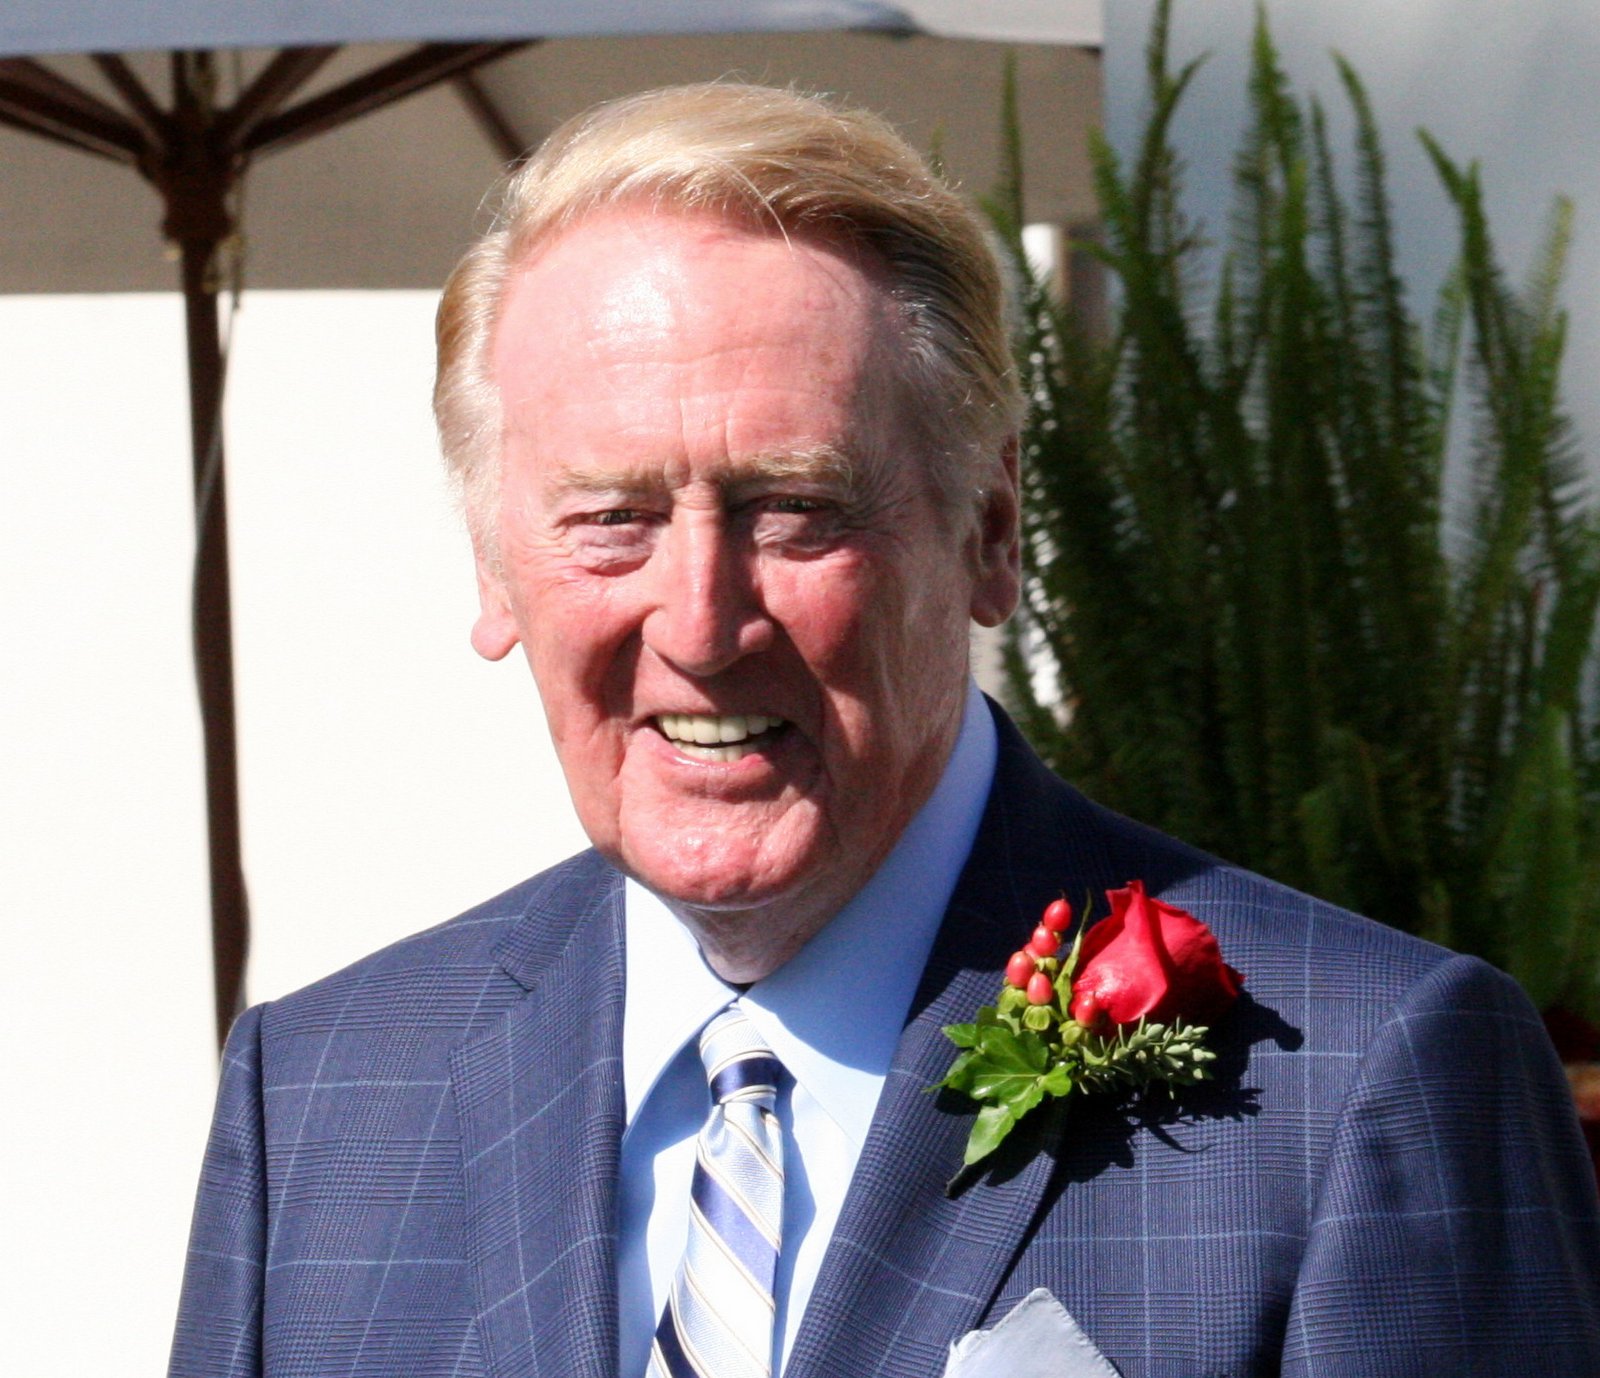 Dodgers broadcasting legend Vin Scully, photographed in September 2013. He died on August 2 at the age of 94. Image courtesy of Wikimedia Commons, photo credit Floatjon. Shared under the Creative Commons Attribution-Share Alike 3.0 Unported license.